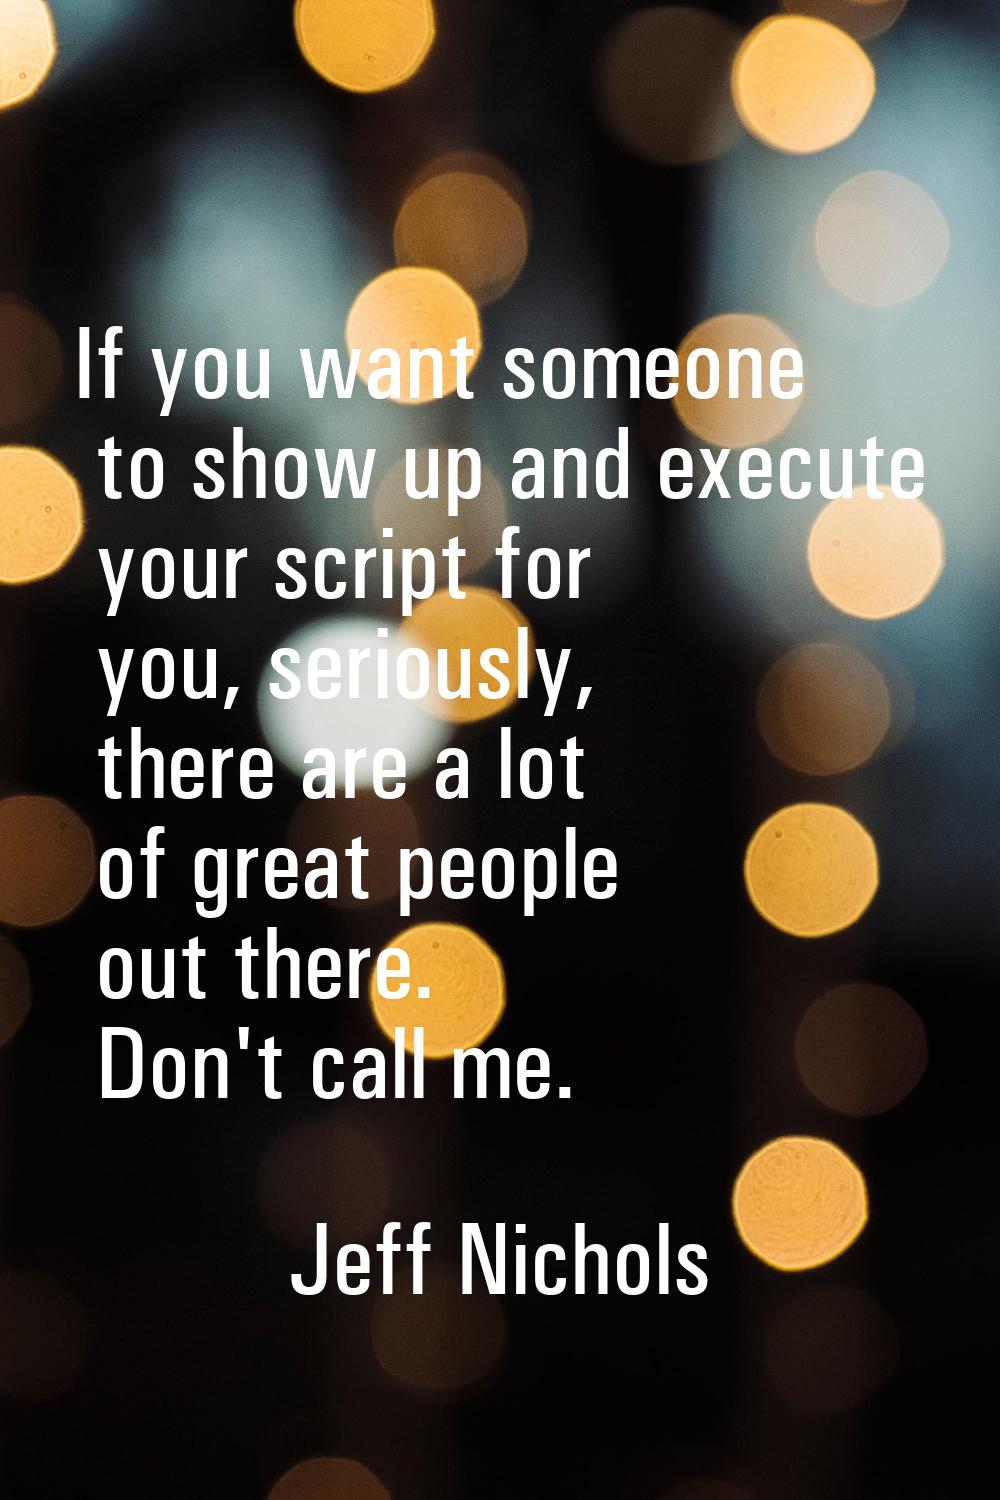 If you want someone to show up and execute your script for you, seriously, there are a lot of great